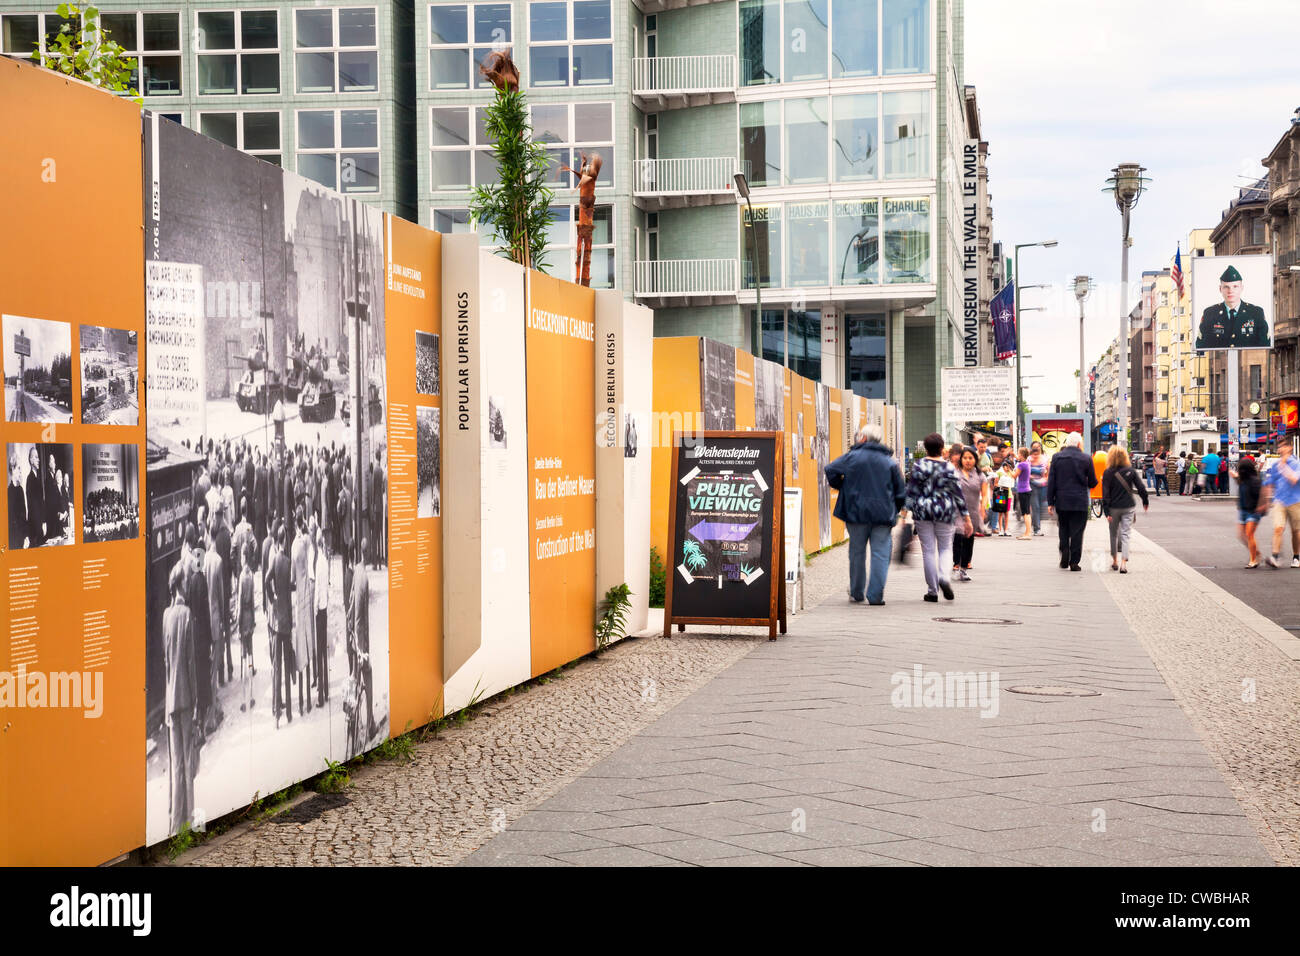 Approche de Friedrichstrasse Checkpoint Charlie, Berlin, Allemagne Banque D'Images